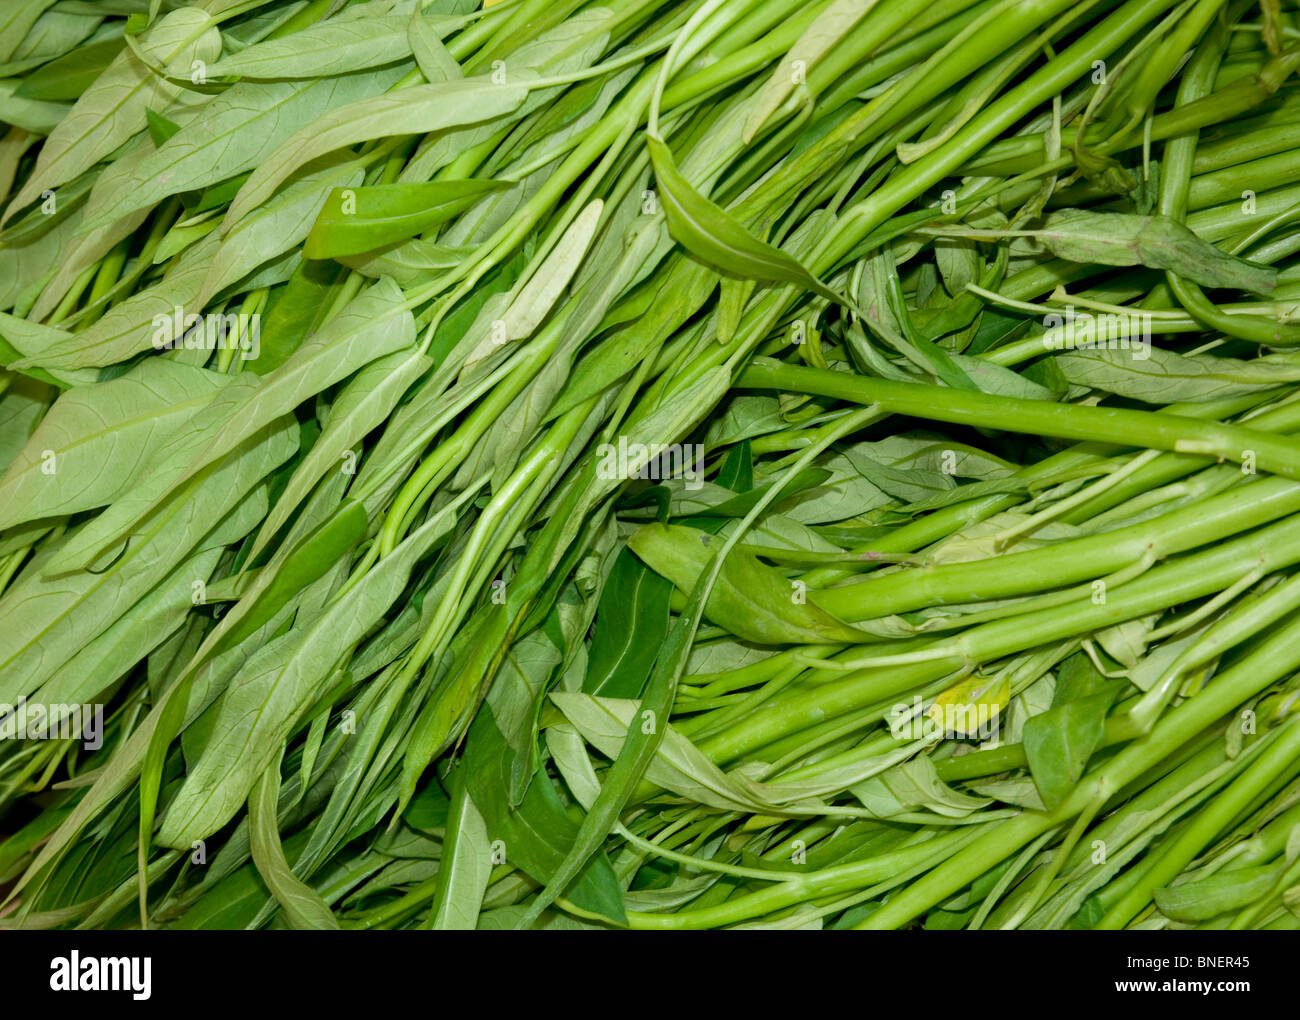 Water spinach, also called water morning glory. Stock Photo